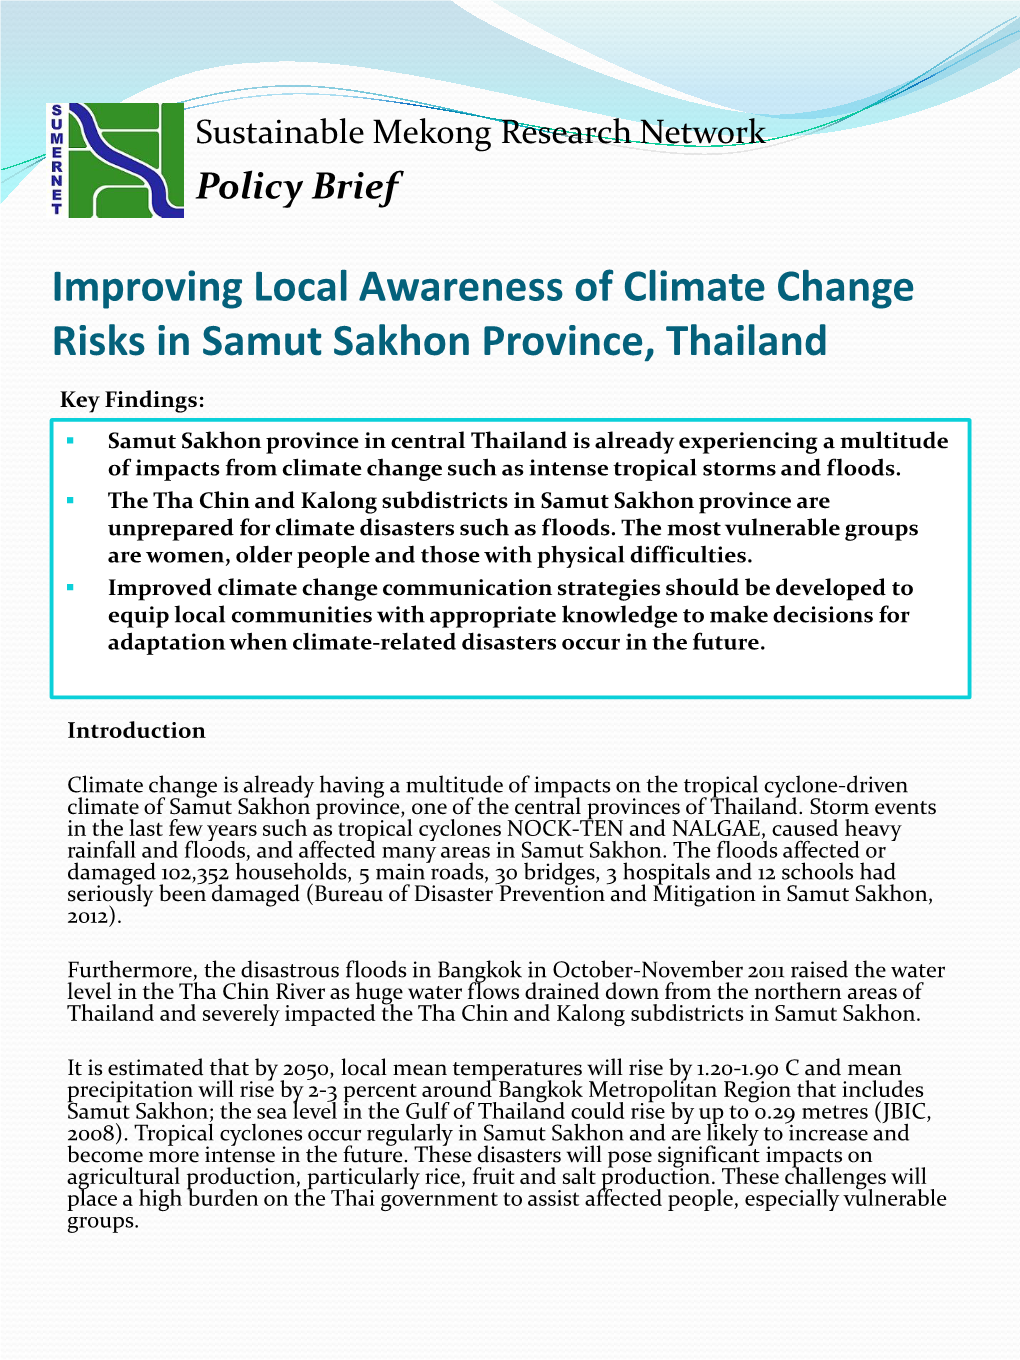 Improving Local Awareness of Climate Change Risks in Samut Sakhon Province, Thailand Key Findings